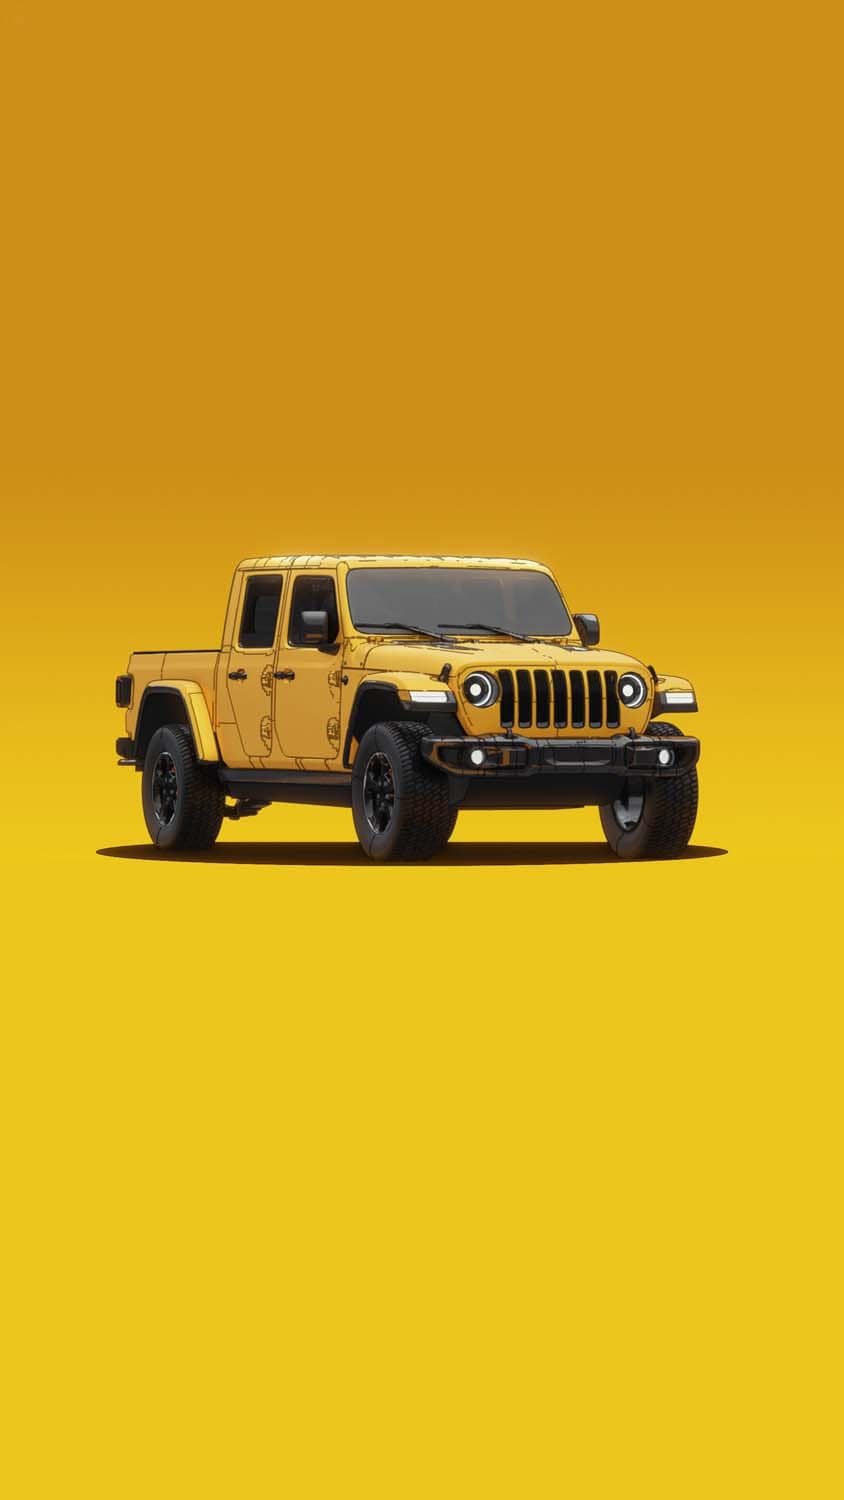 Jeep Gladiator IPhone Wallpaper HD  IPhone Wallpapers